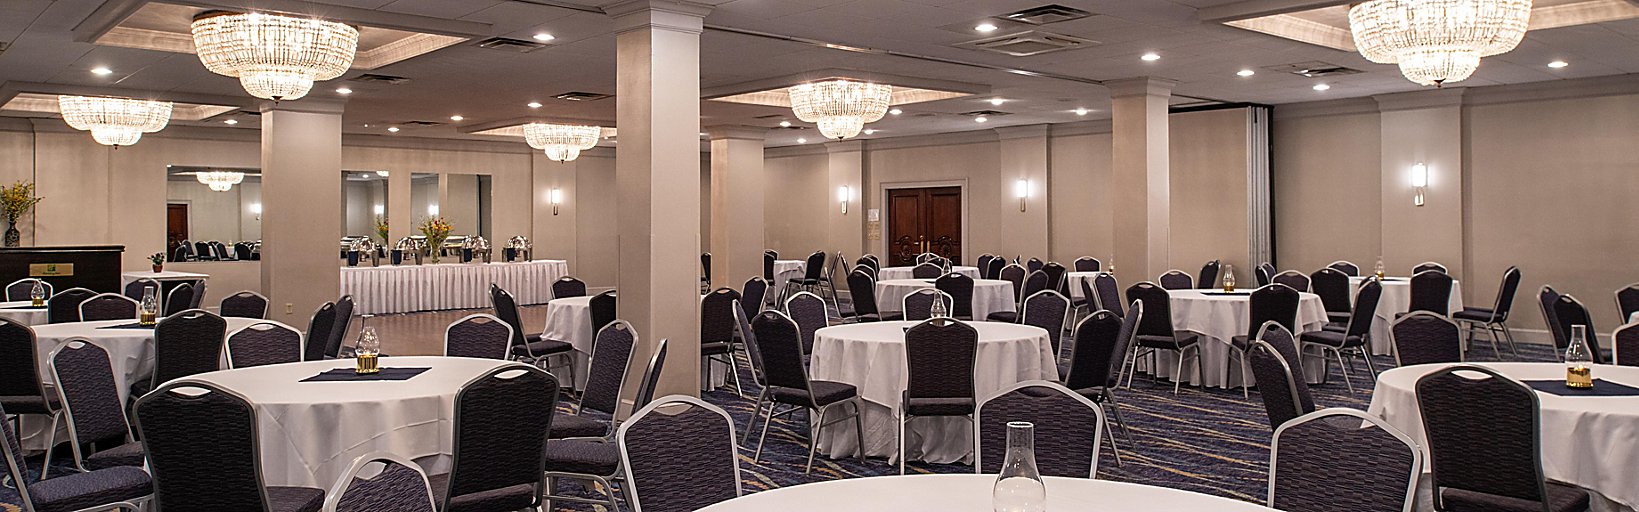 12++ Concord nh restaurants with function rooms